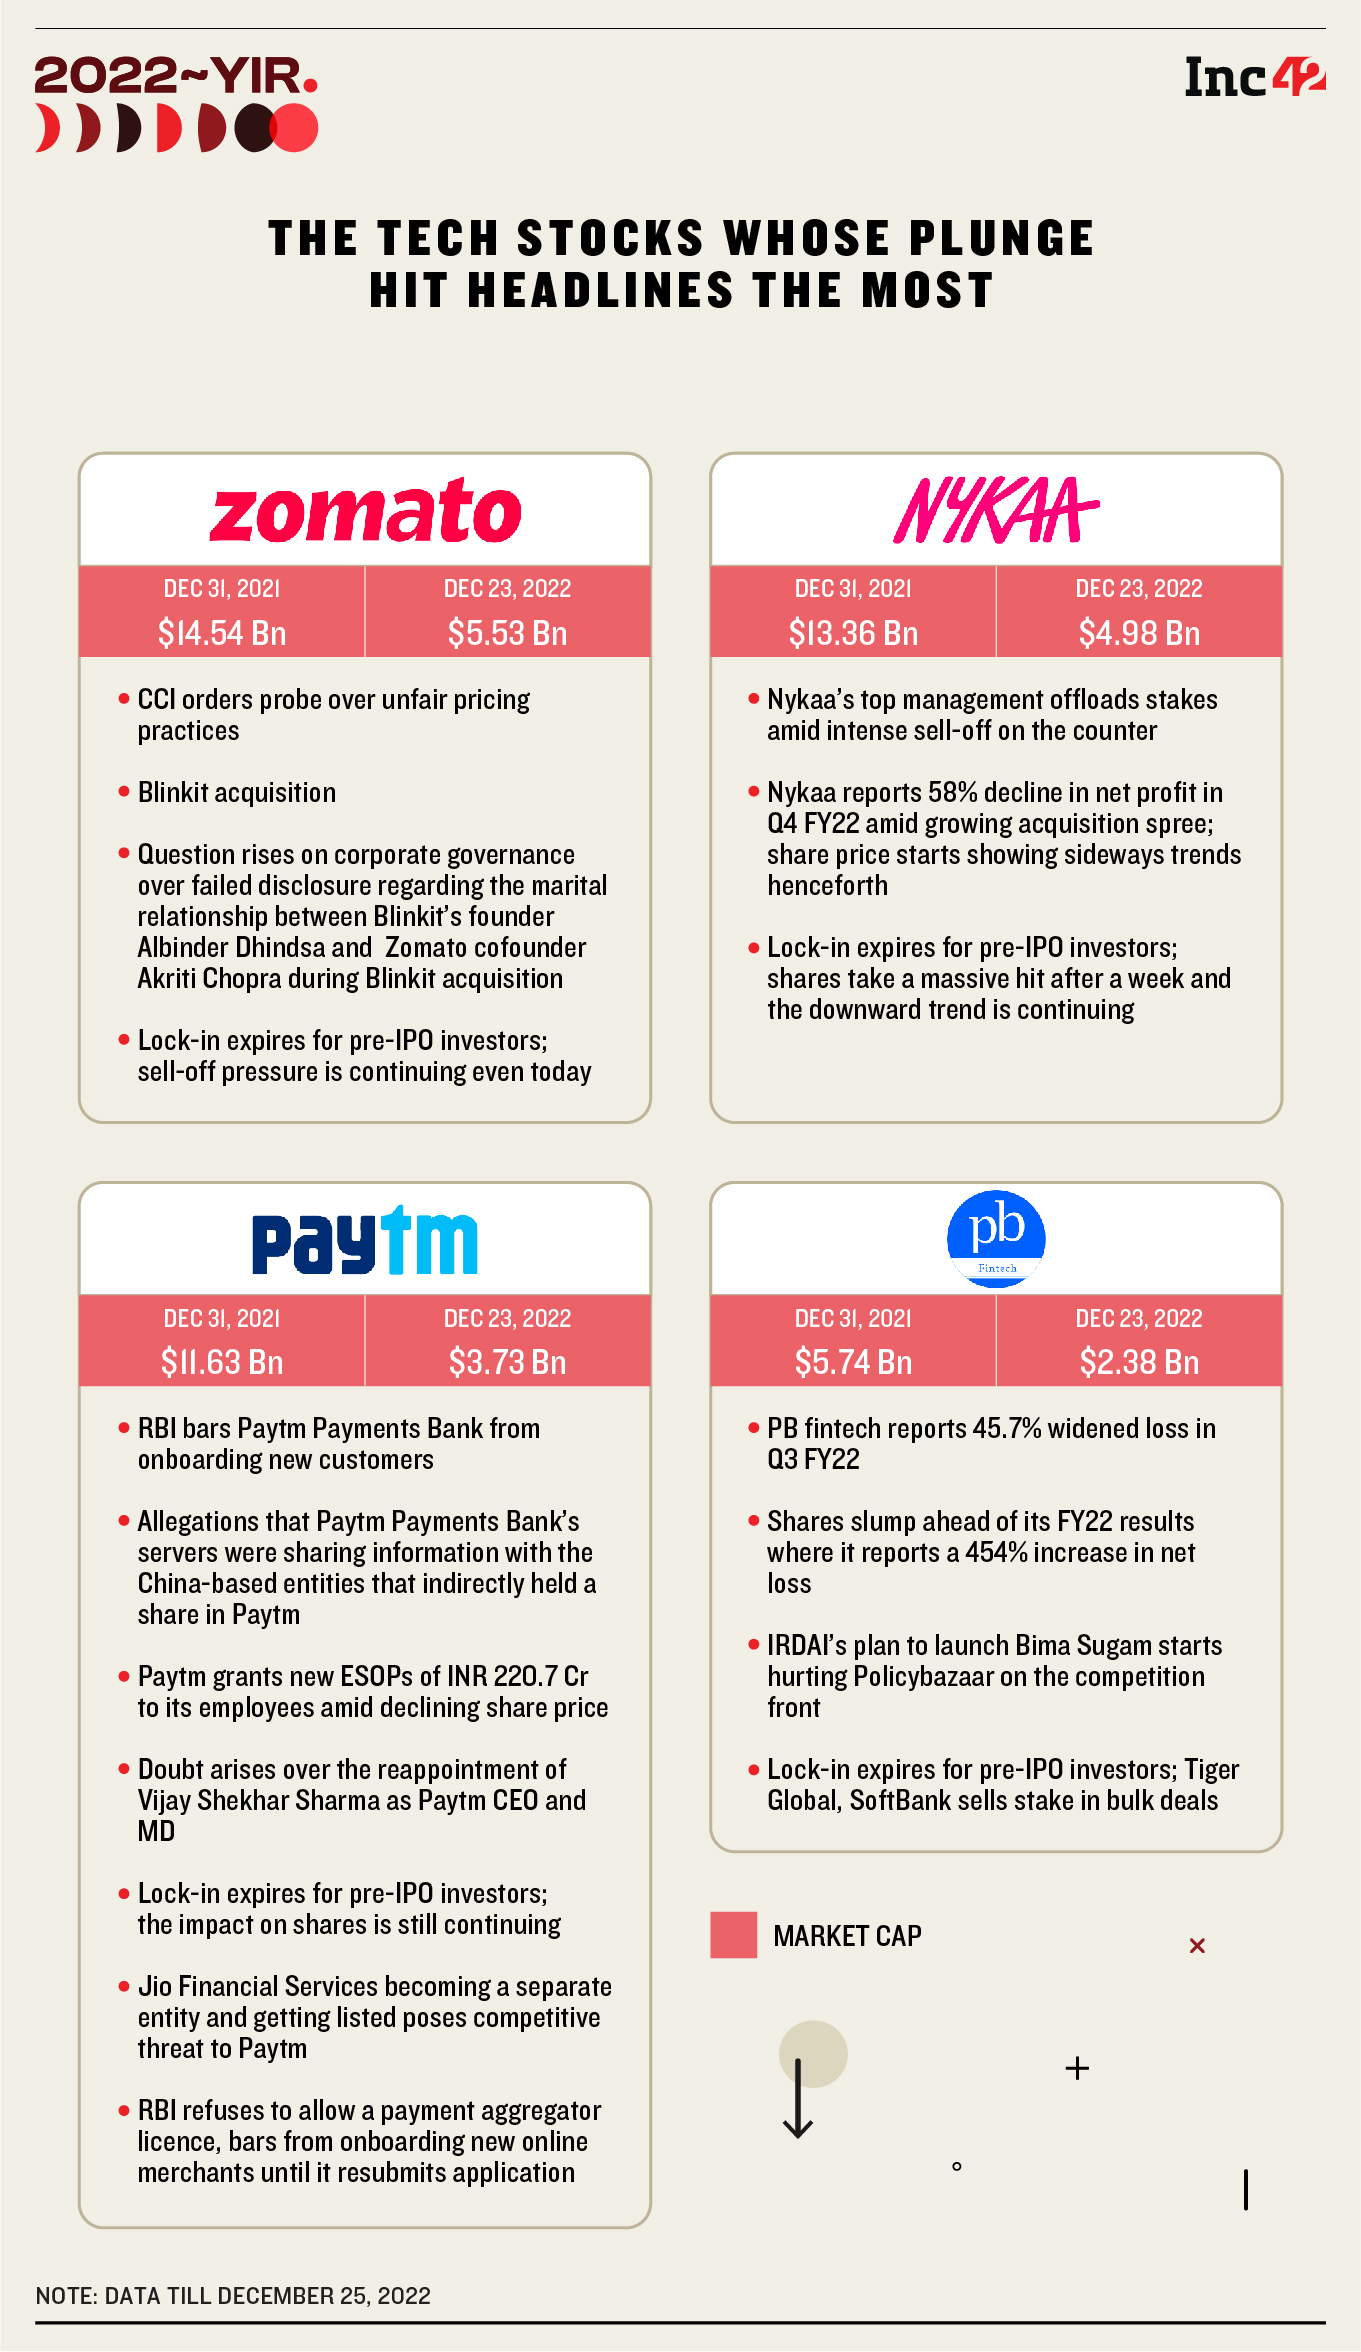 The Year Of Pain: From Zomato To Paytm, New Age Tech Stocks Lose $30 Bn In Market Cap In 2022